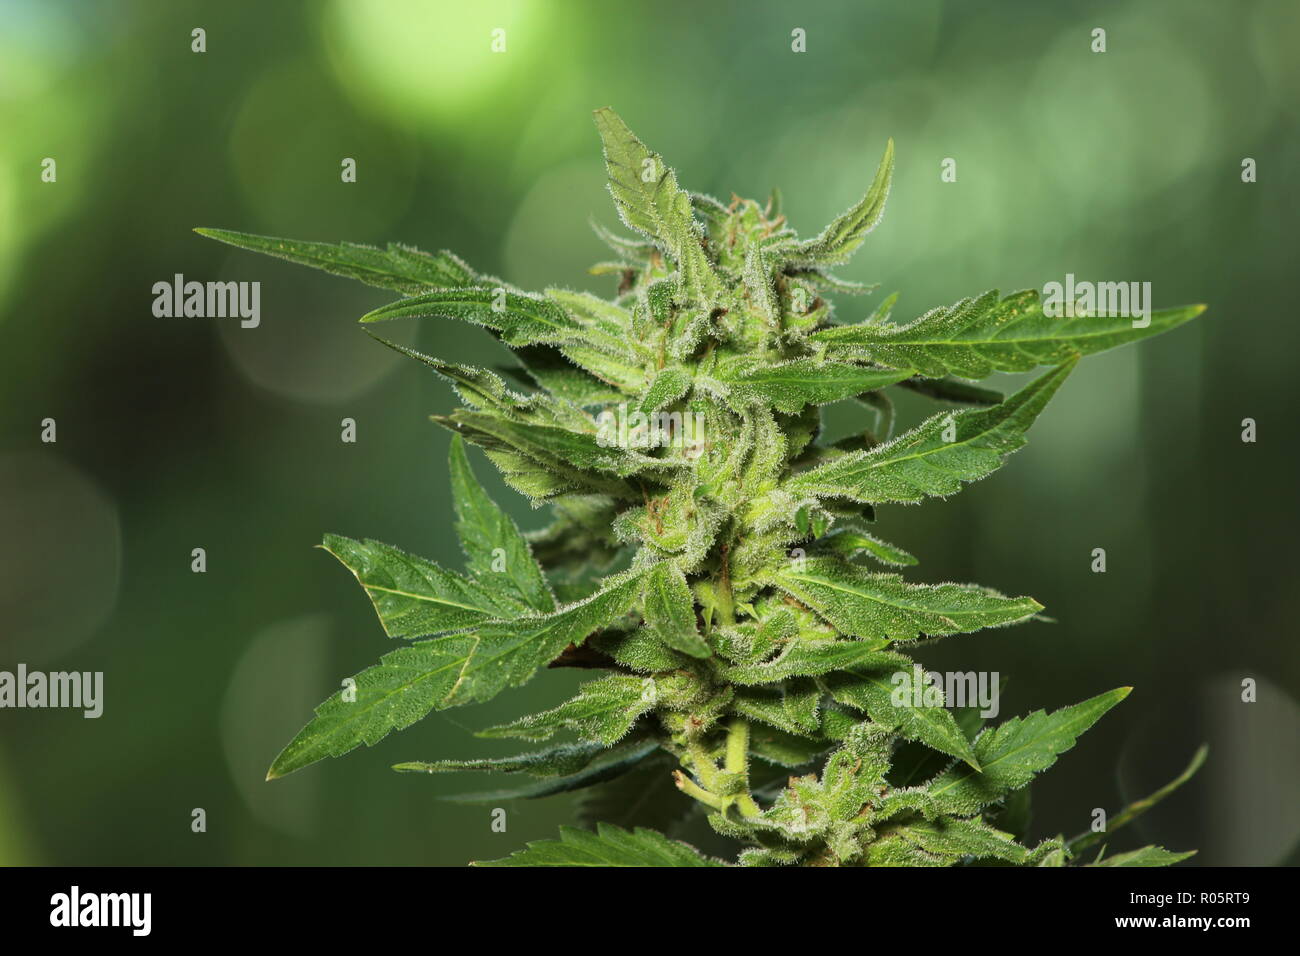 Close up of marijuana plant growing in garden, ready for harvest. Diffuse green background. Stock Photo